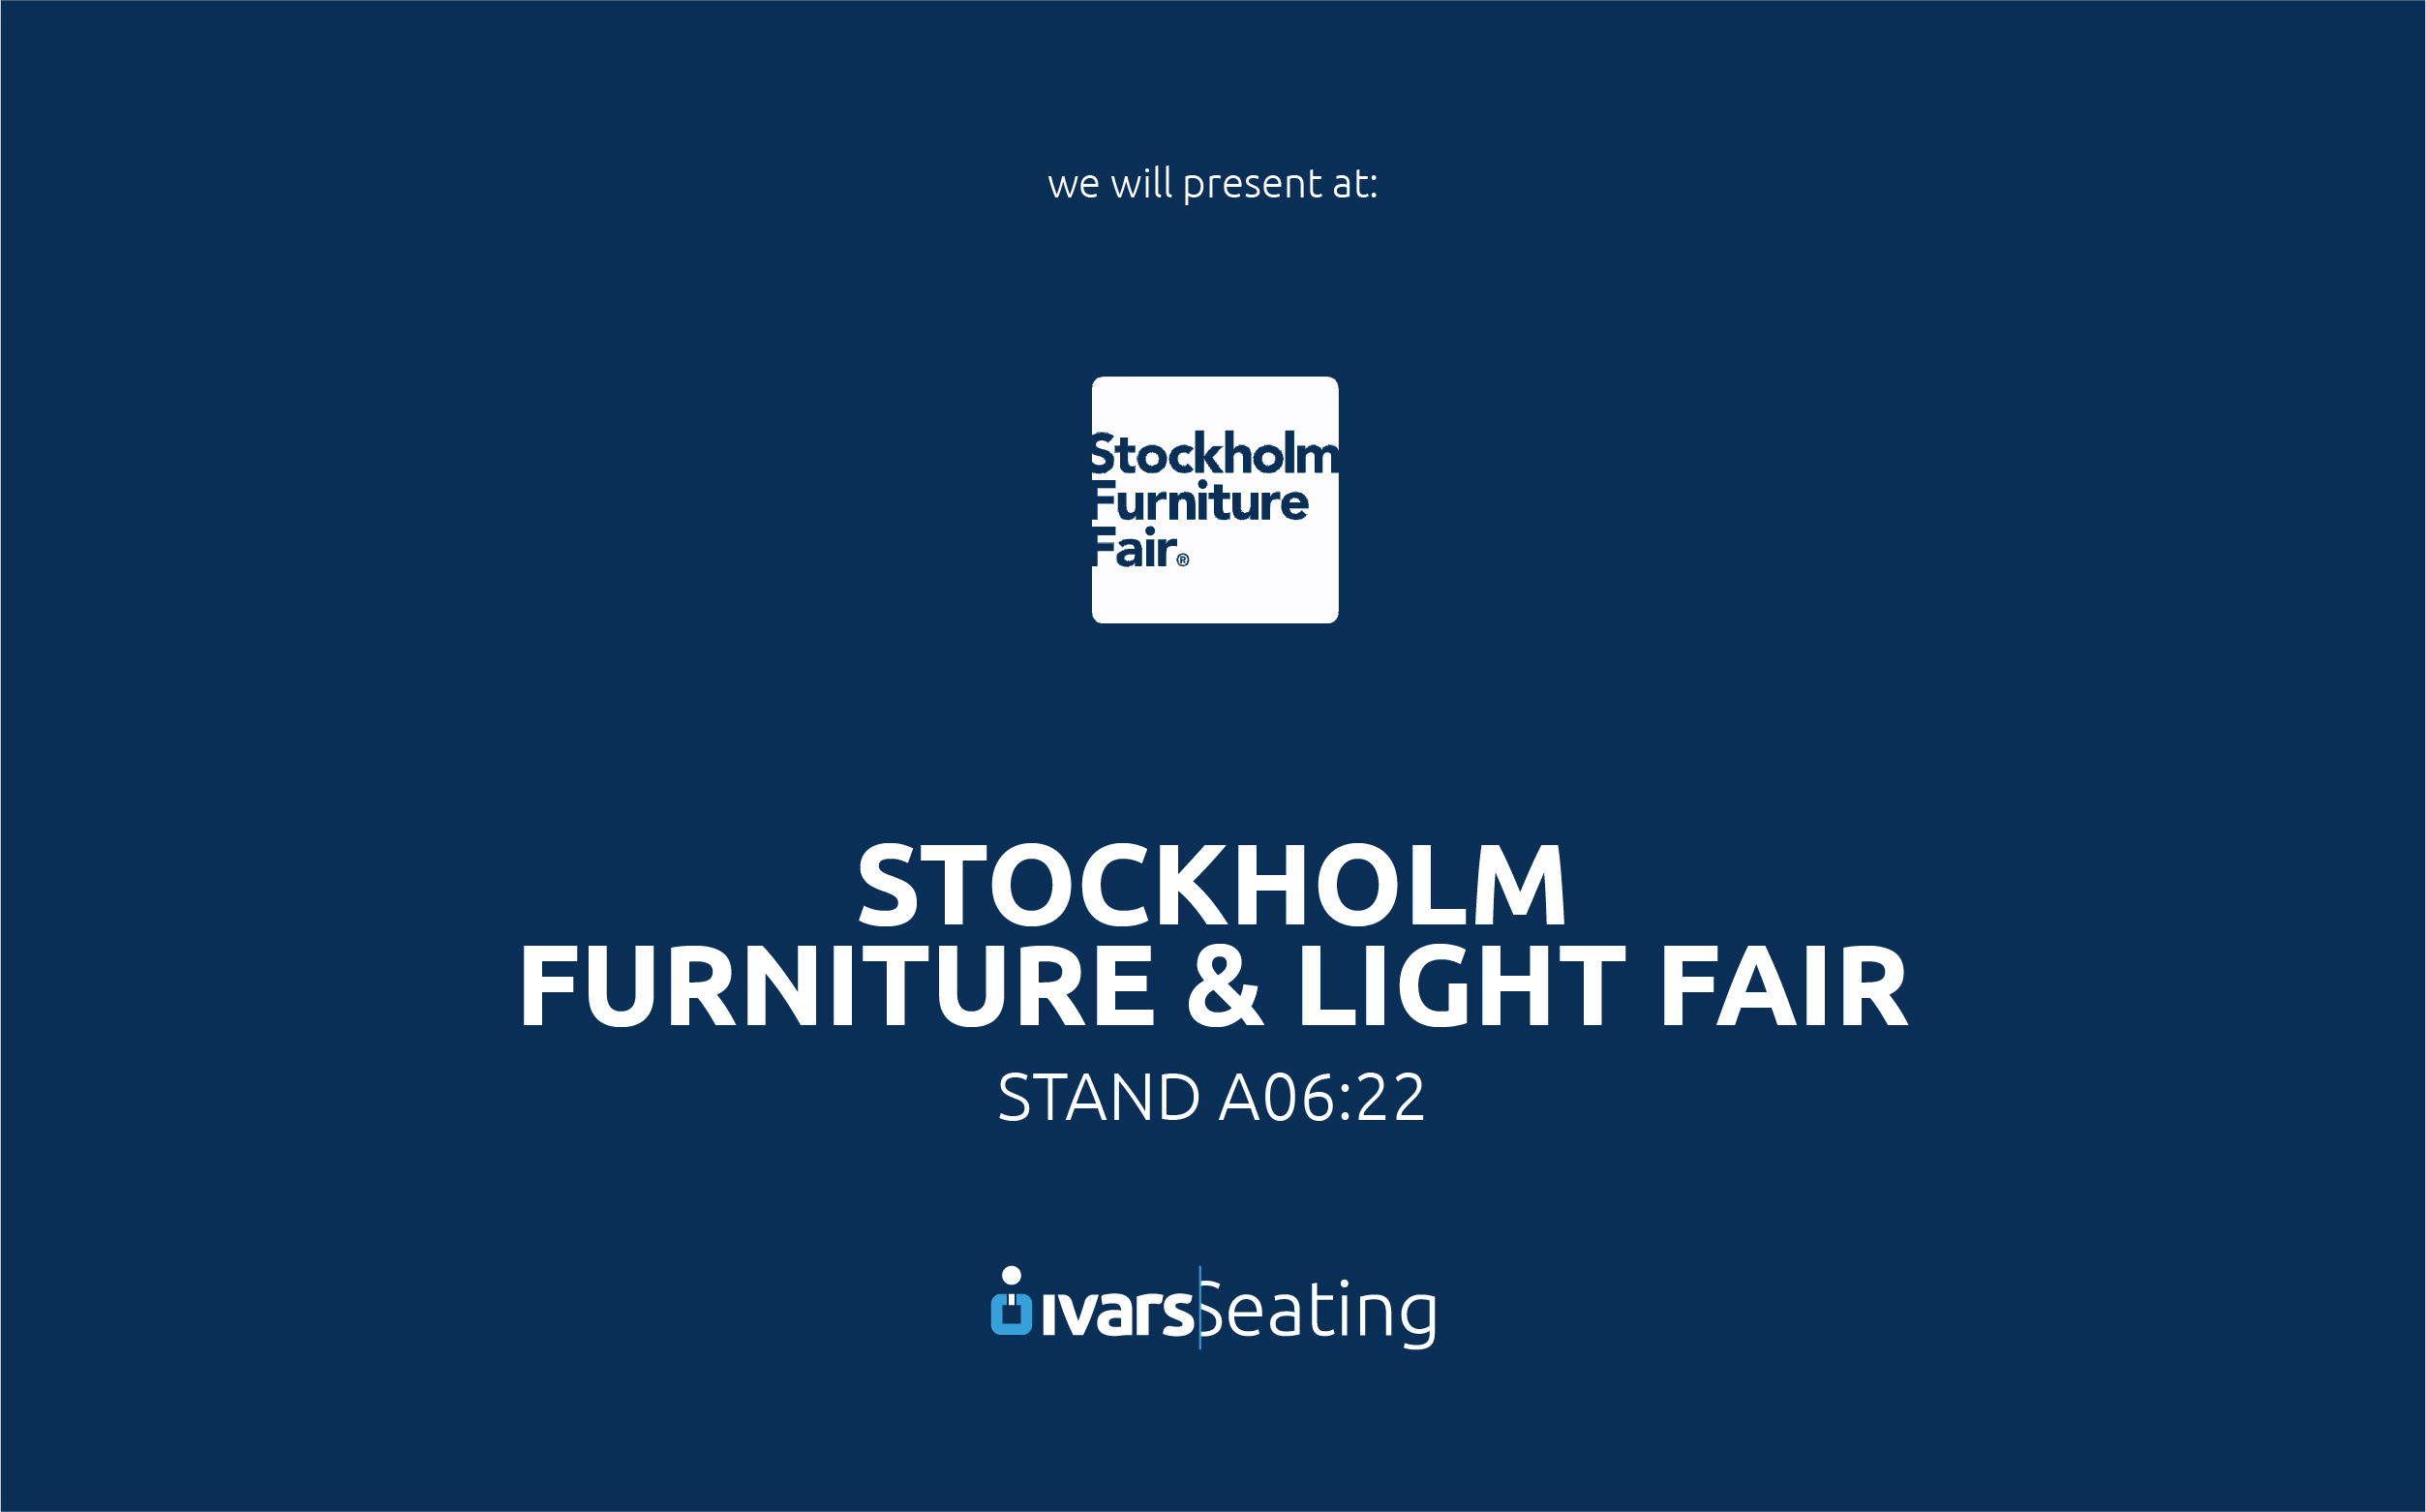 ivars-seating-will-be-present-at-the-stockholm-furniture-and-light-fair